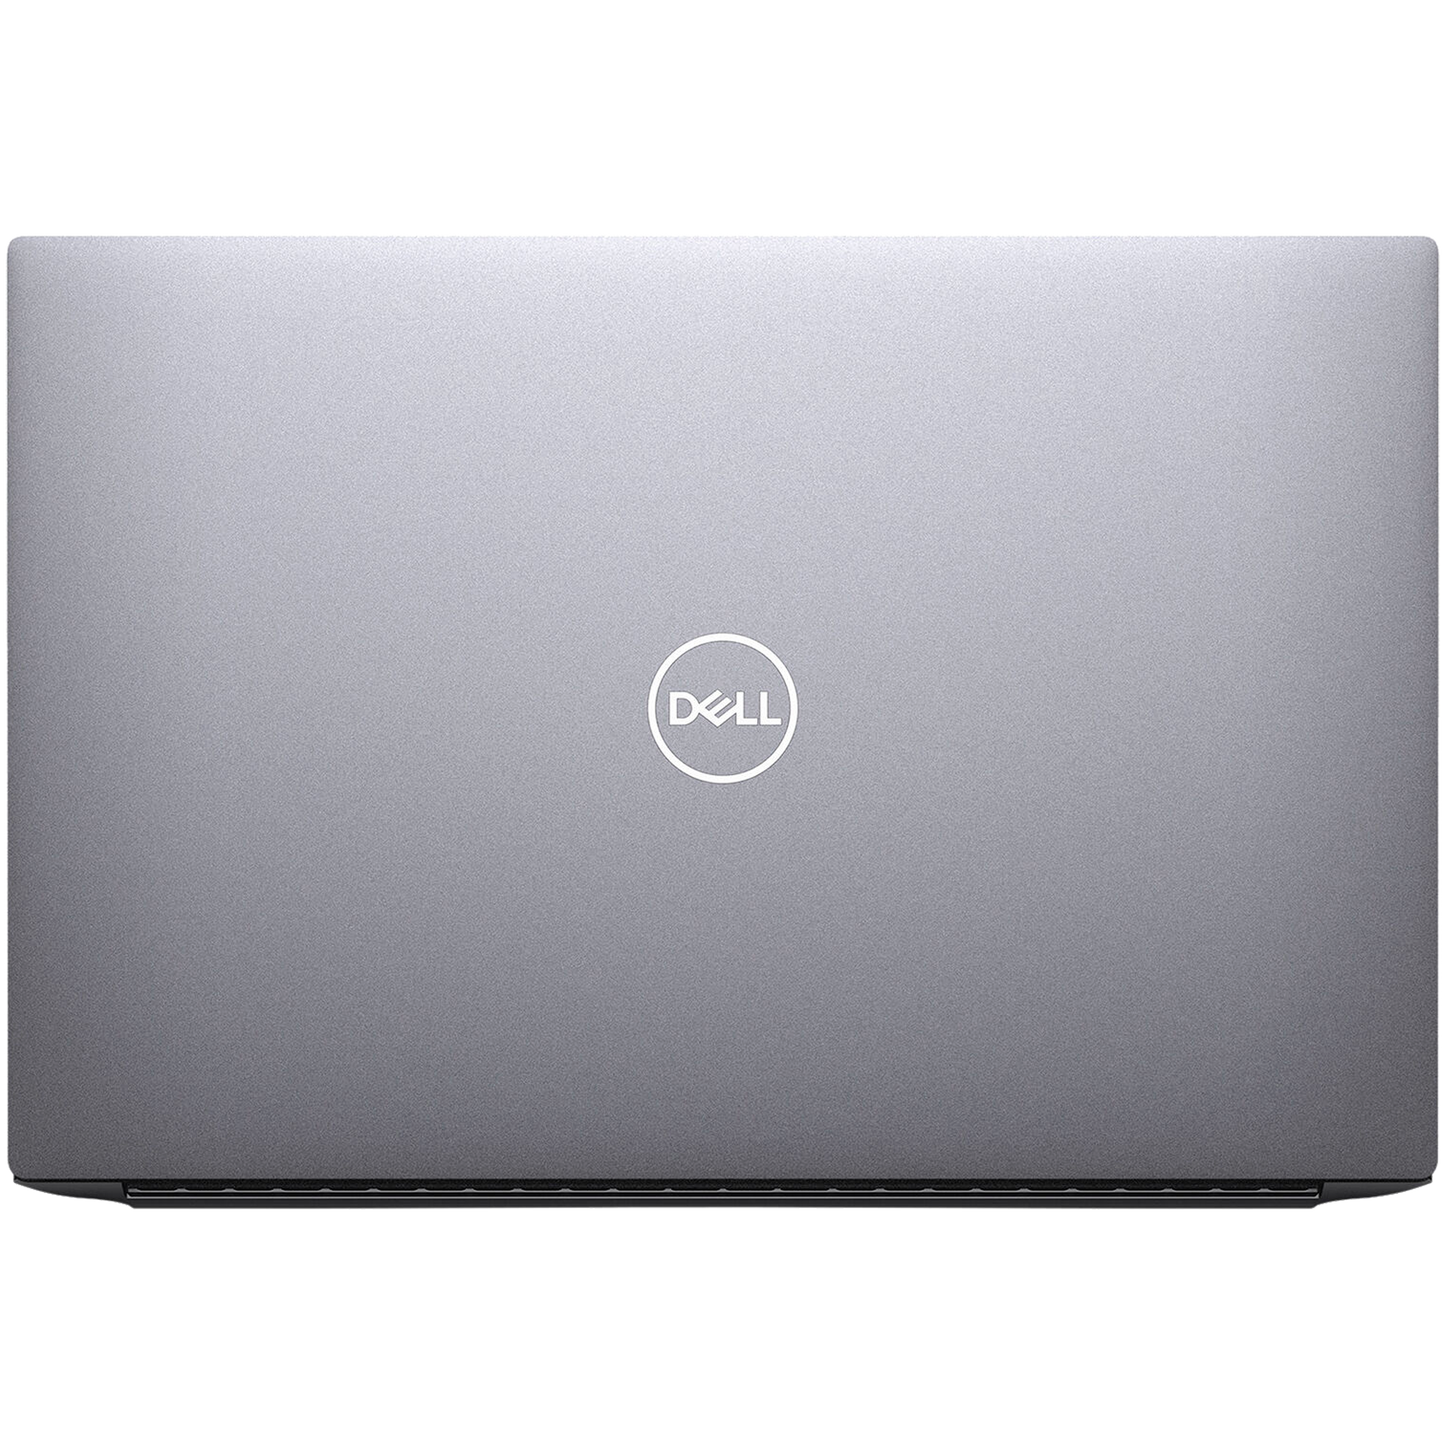 Dell Precision 5550 Intel i7, 10th Gen Mobile Workstation Touch Laptop with GPU Laptops - Refurbished